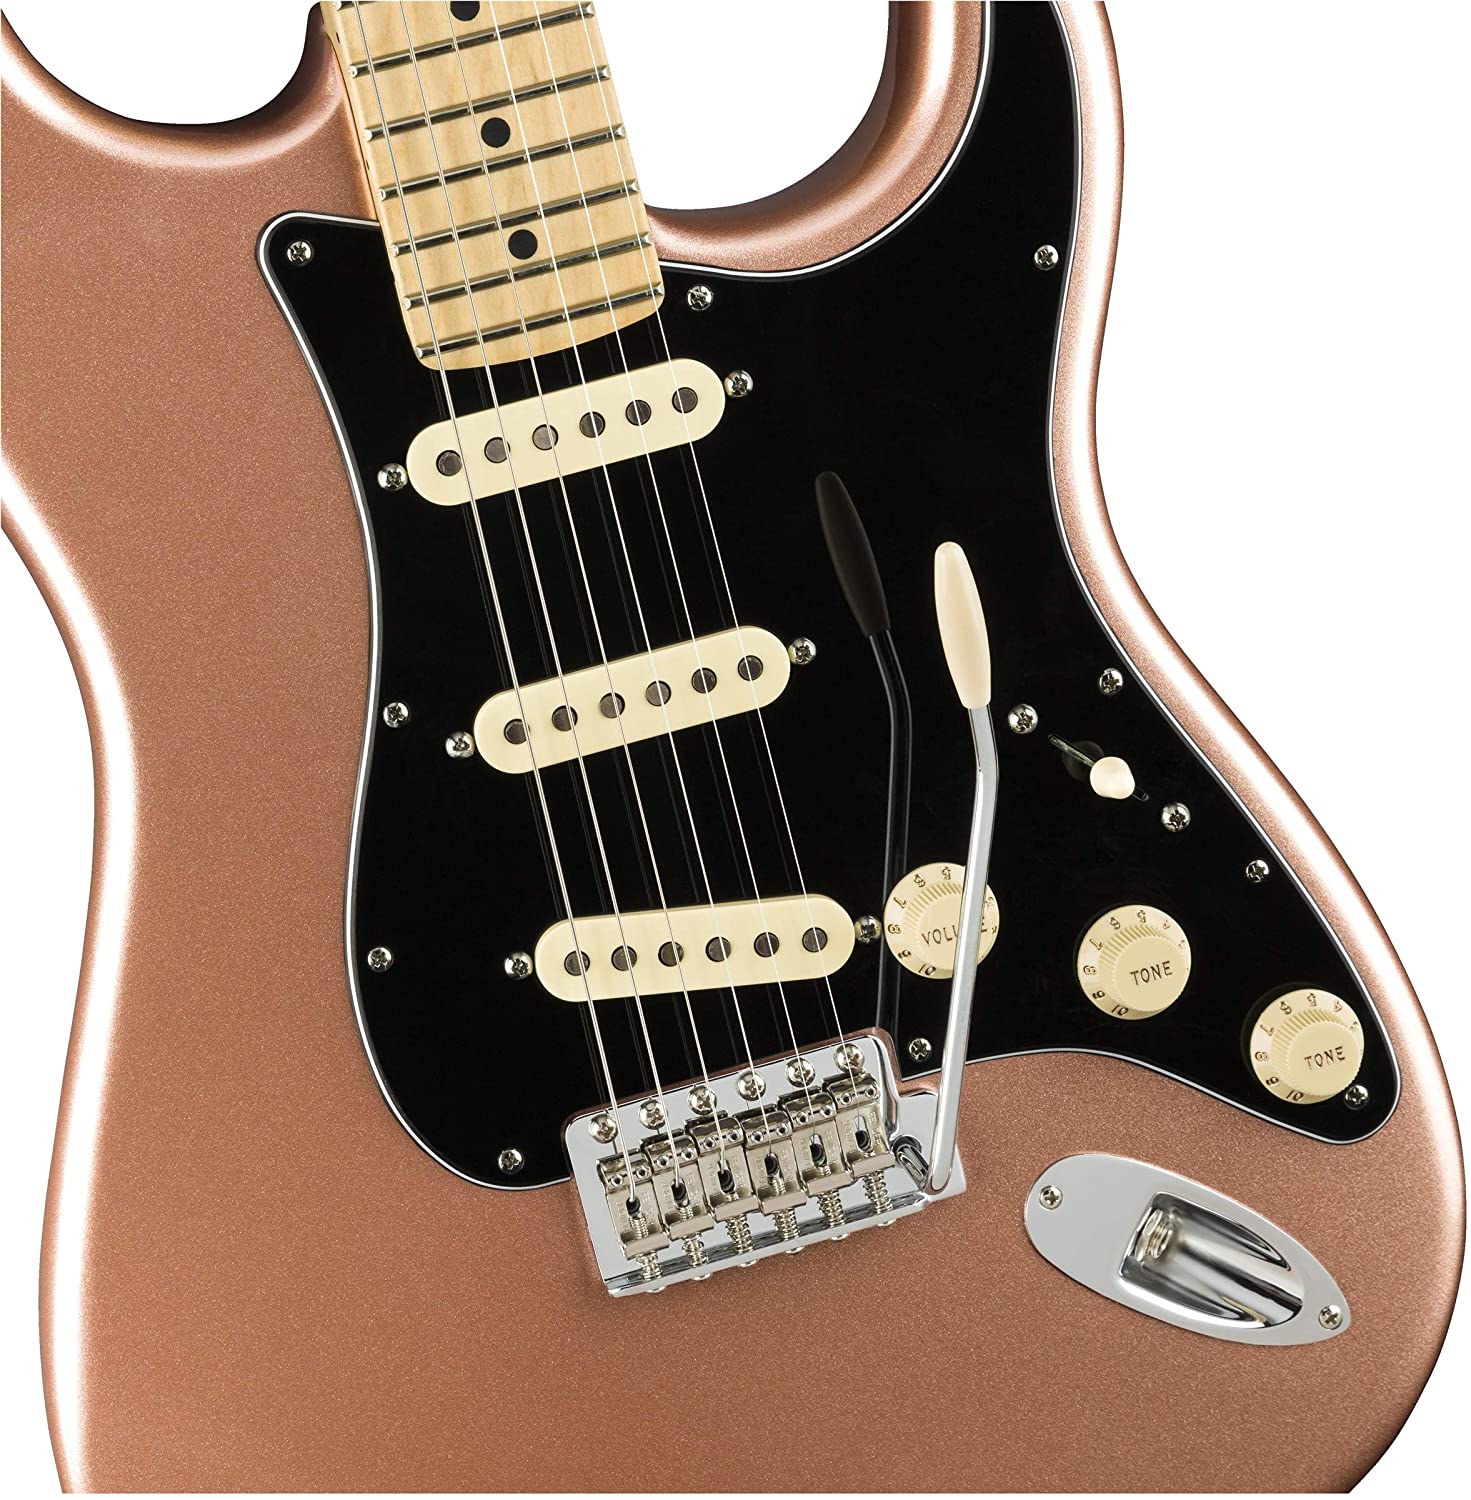 Penny-American Performer Stratocaster